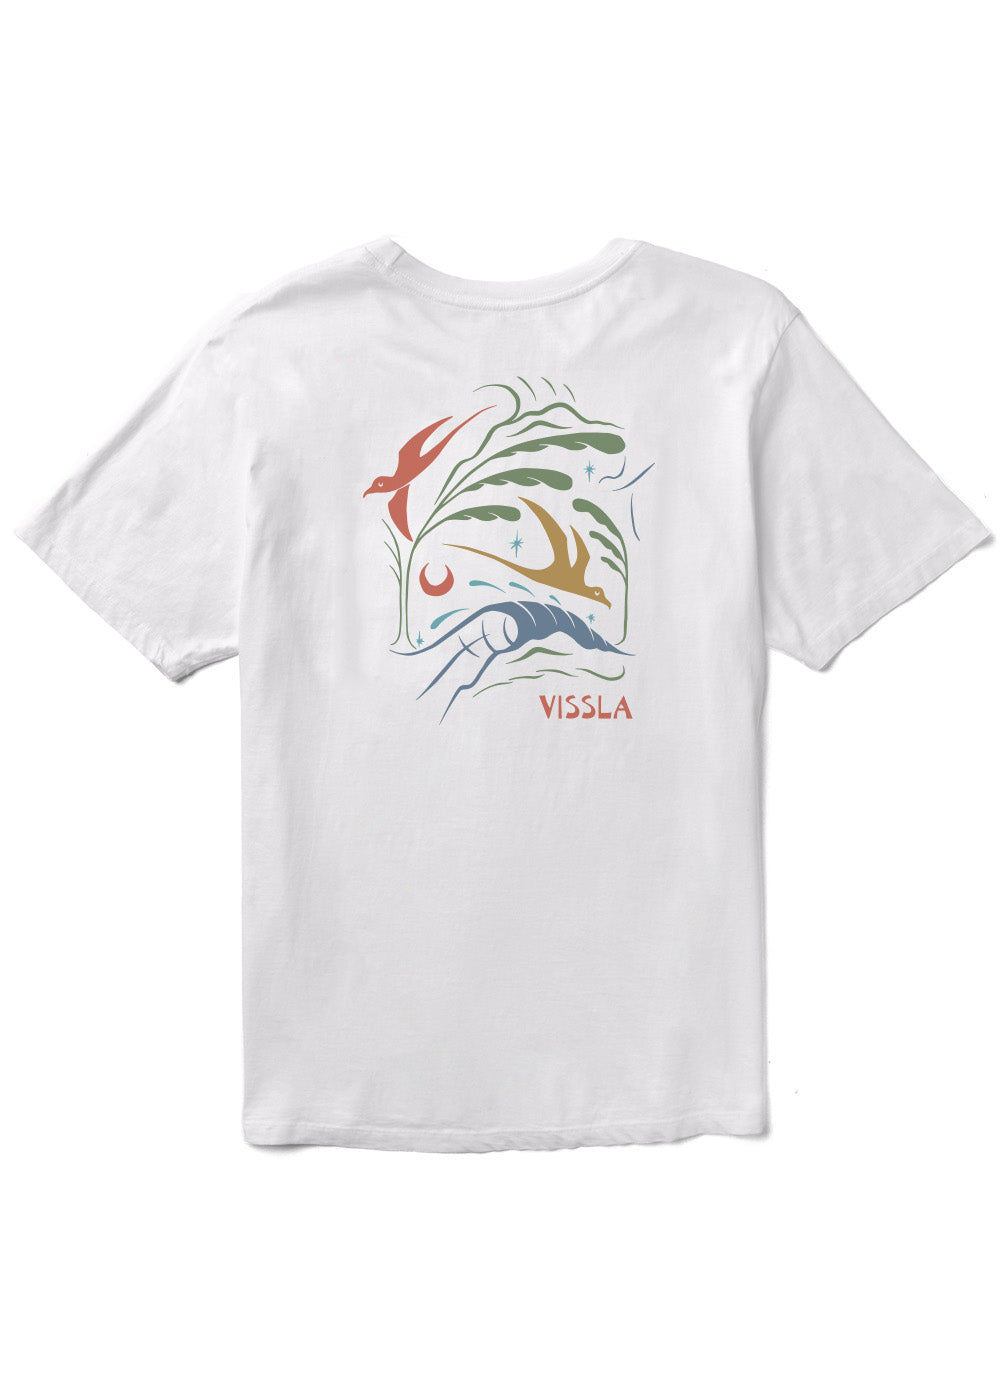 Fish Squad Graphic Tees for Kids - Youth Short Panama